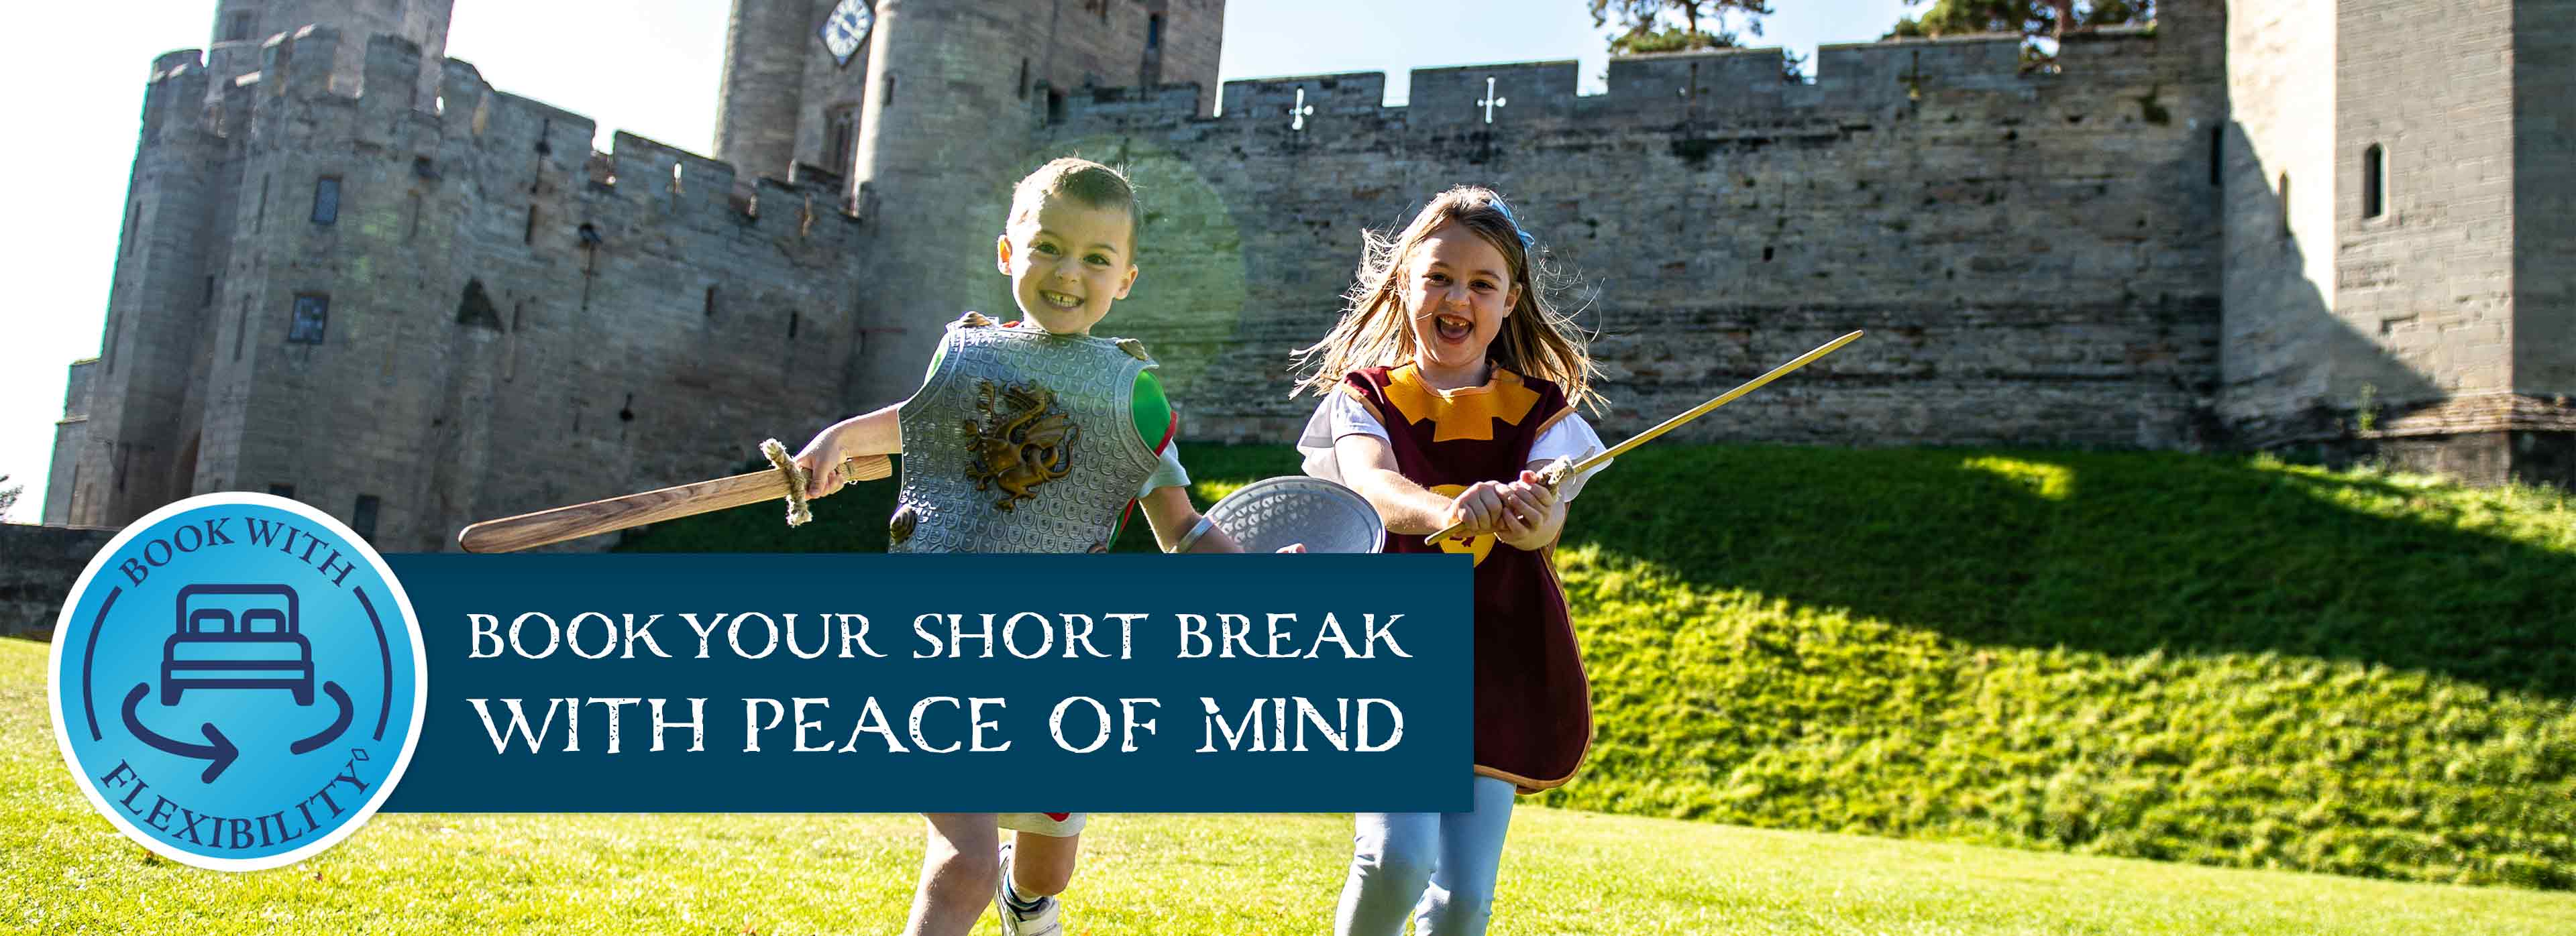 Book with flexibility with Warwick Castle Breaks